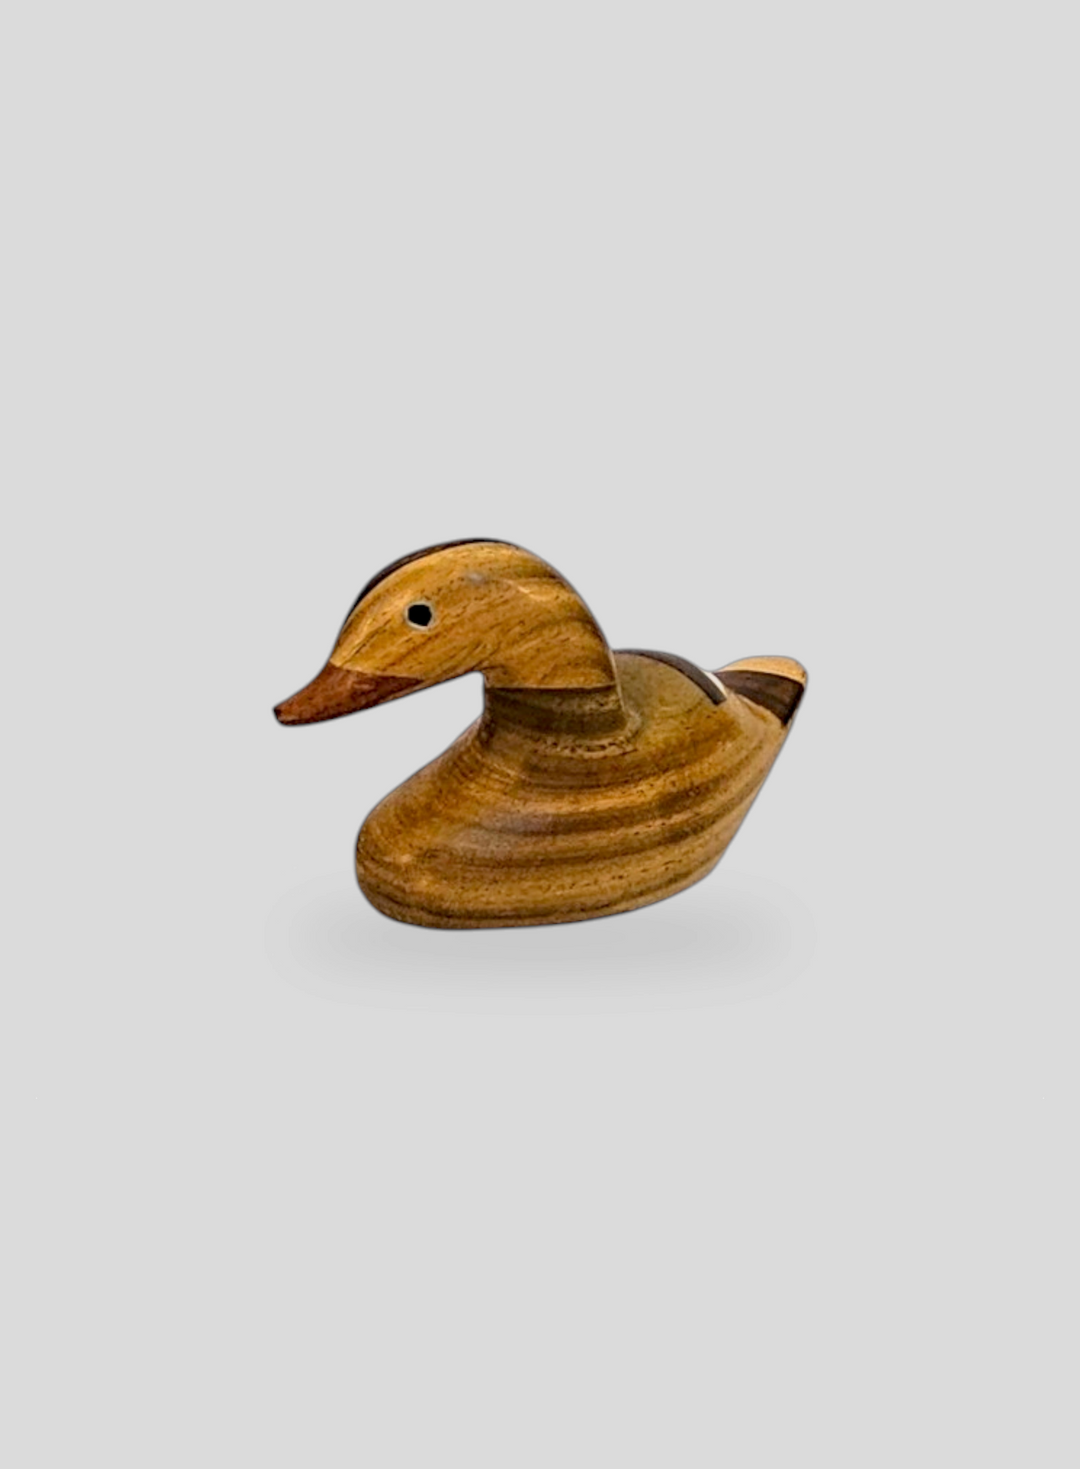 The Duck Carving